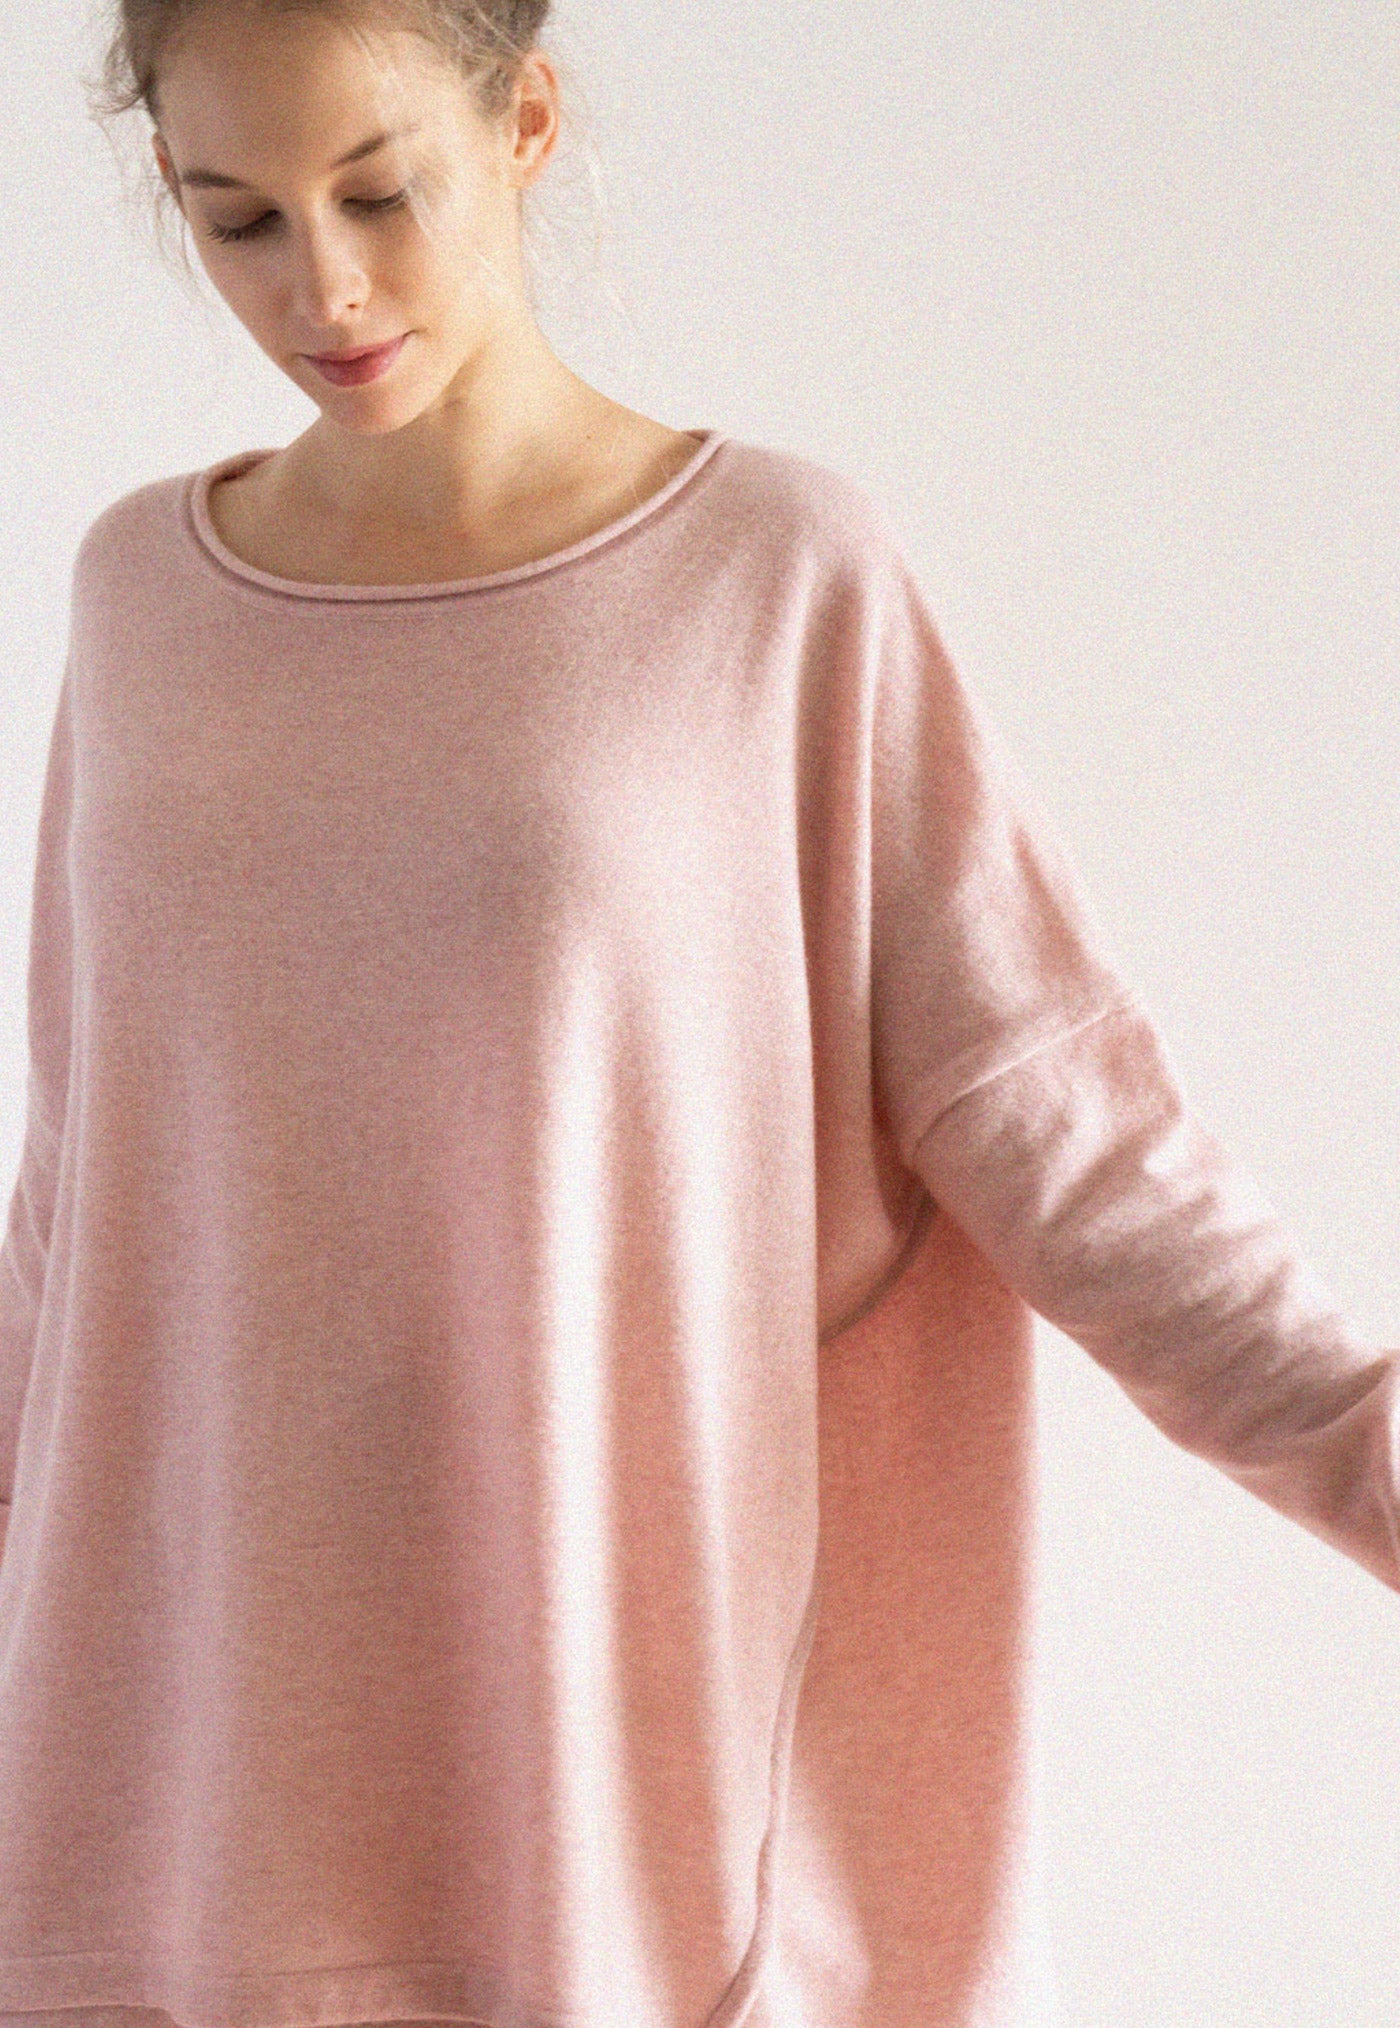 No.36 Slouchy Crew Neck - Rose sold by Angel Divine